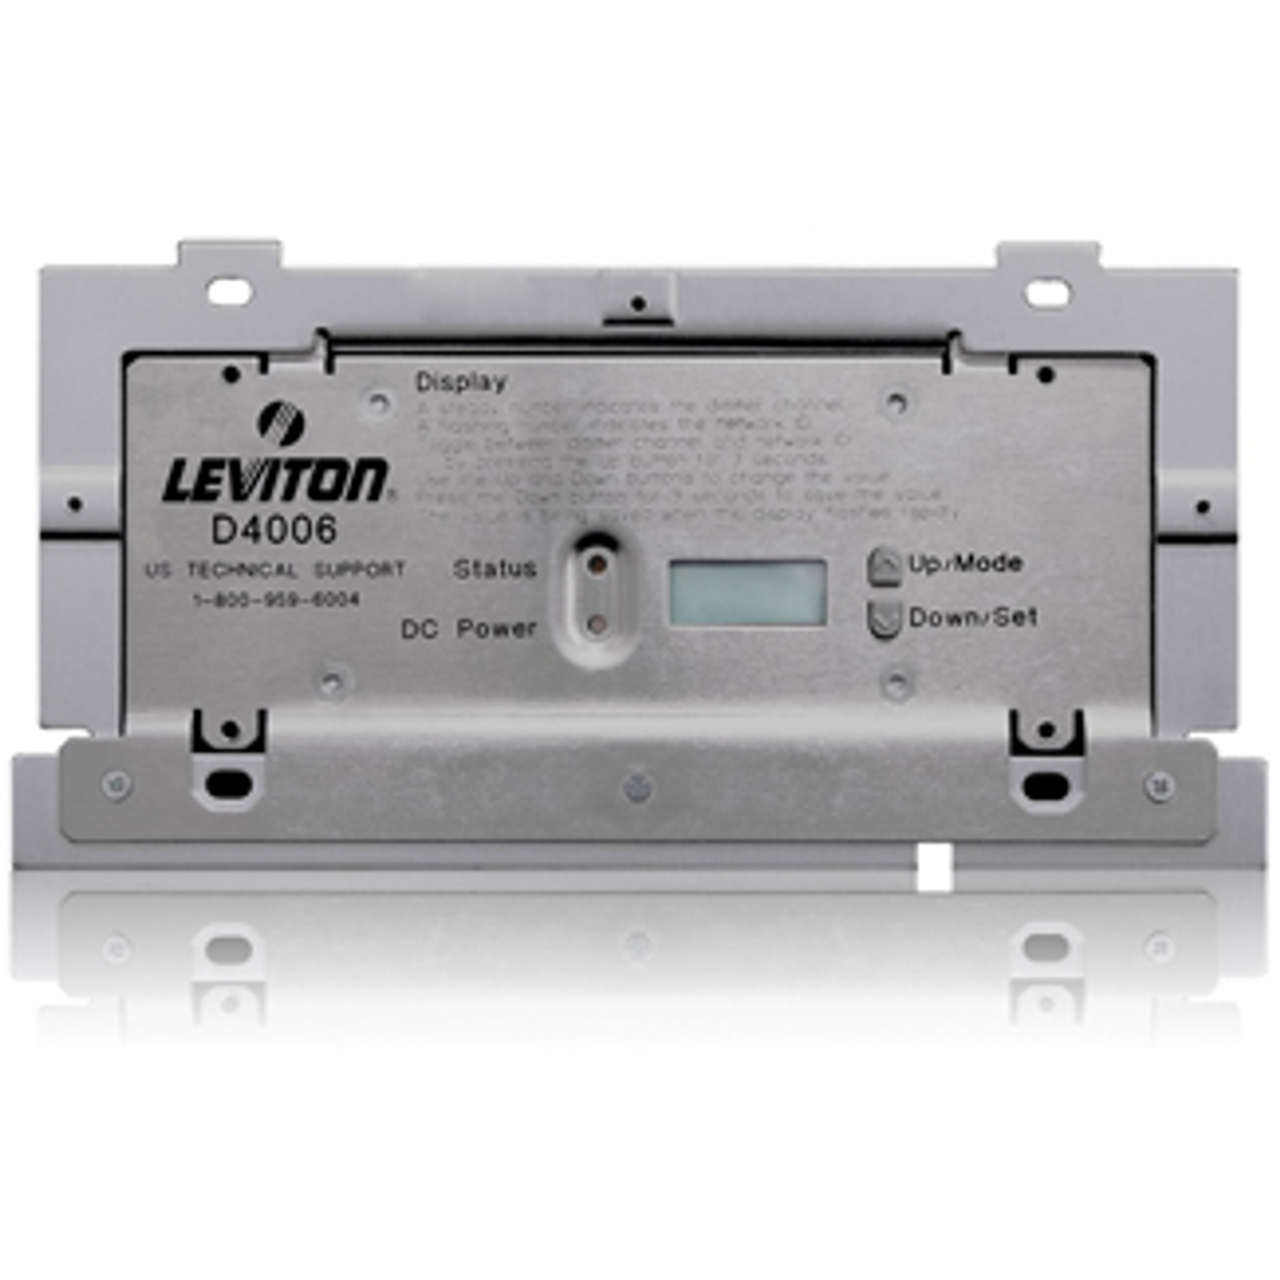 Leviton	D4006-1LW Remote Dimmer for Luma-Net system